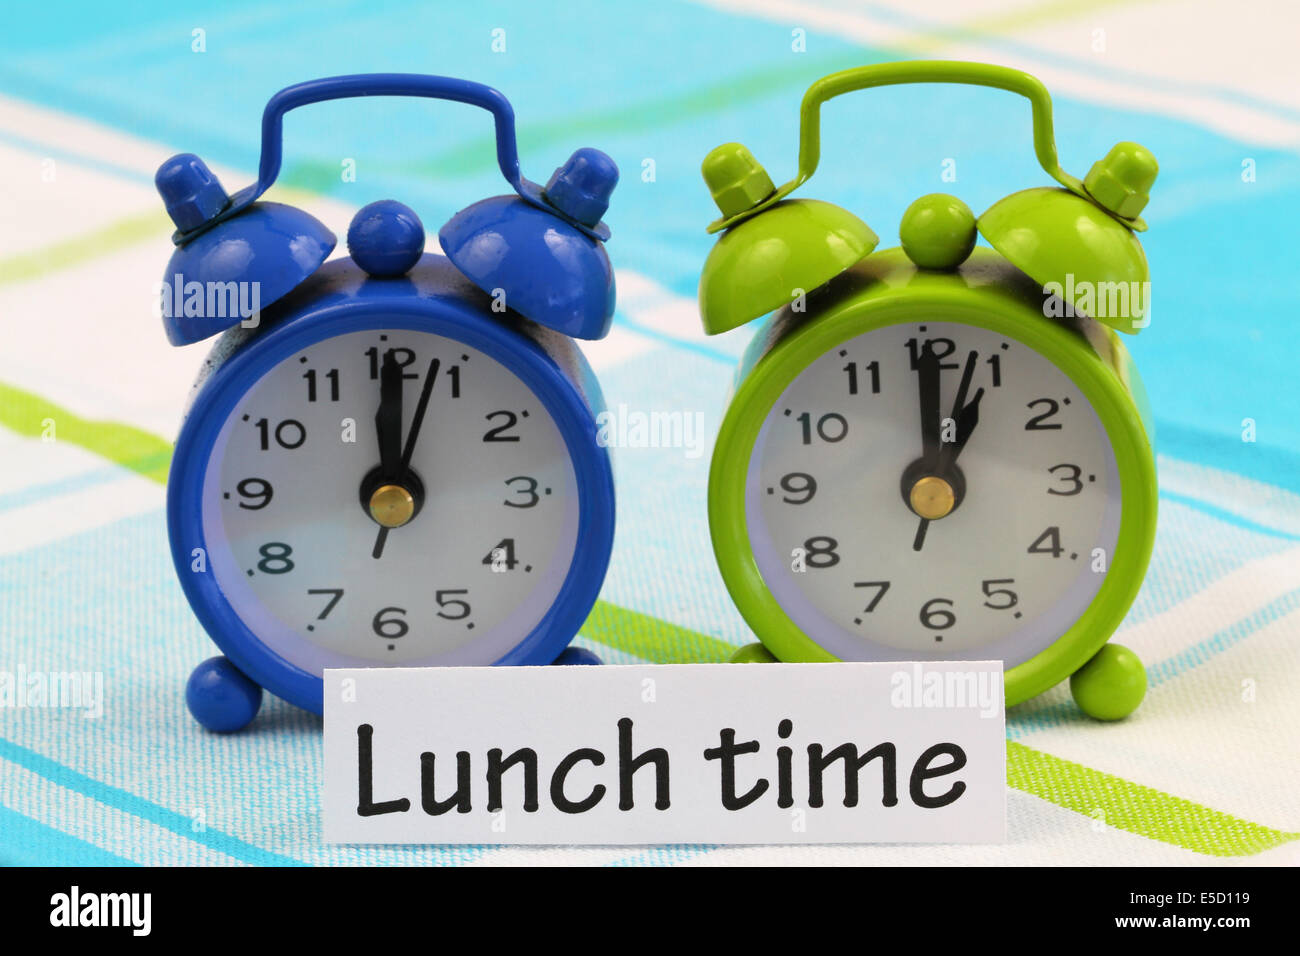 Lunch time card with two miniature clocks showing twelve and one o'clock Stock Photo